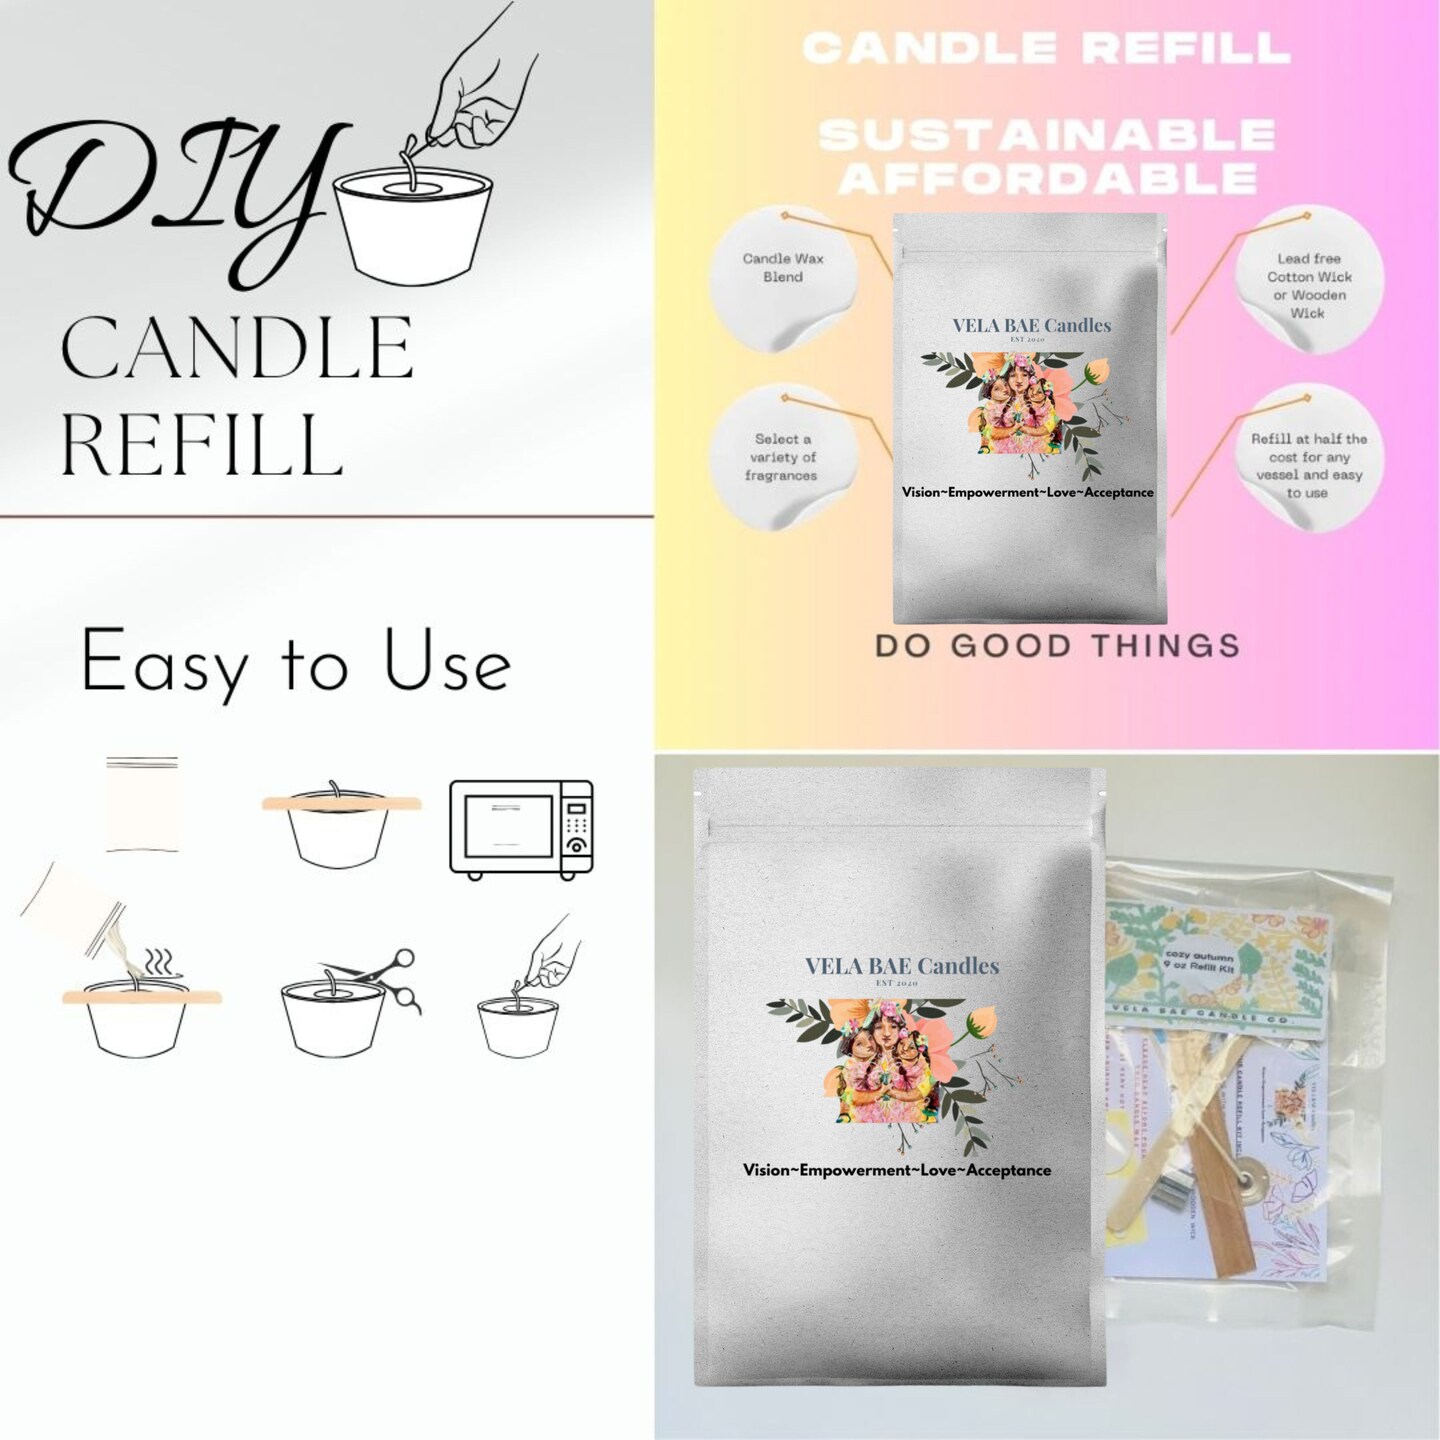 Soy Candle Refill Kit for 16oz Mason Jar Candles